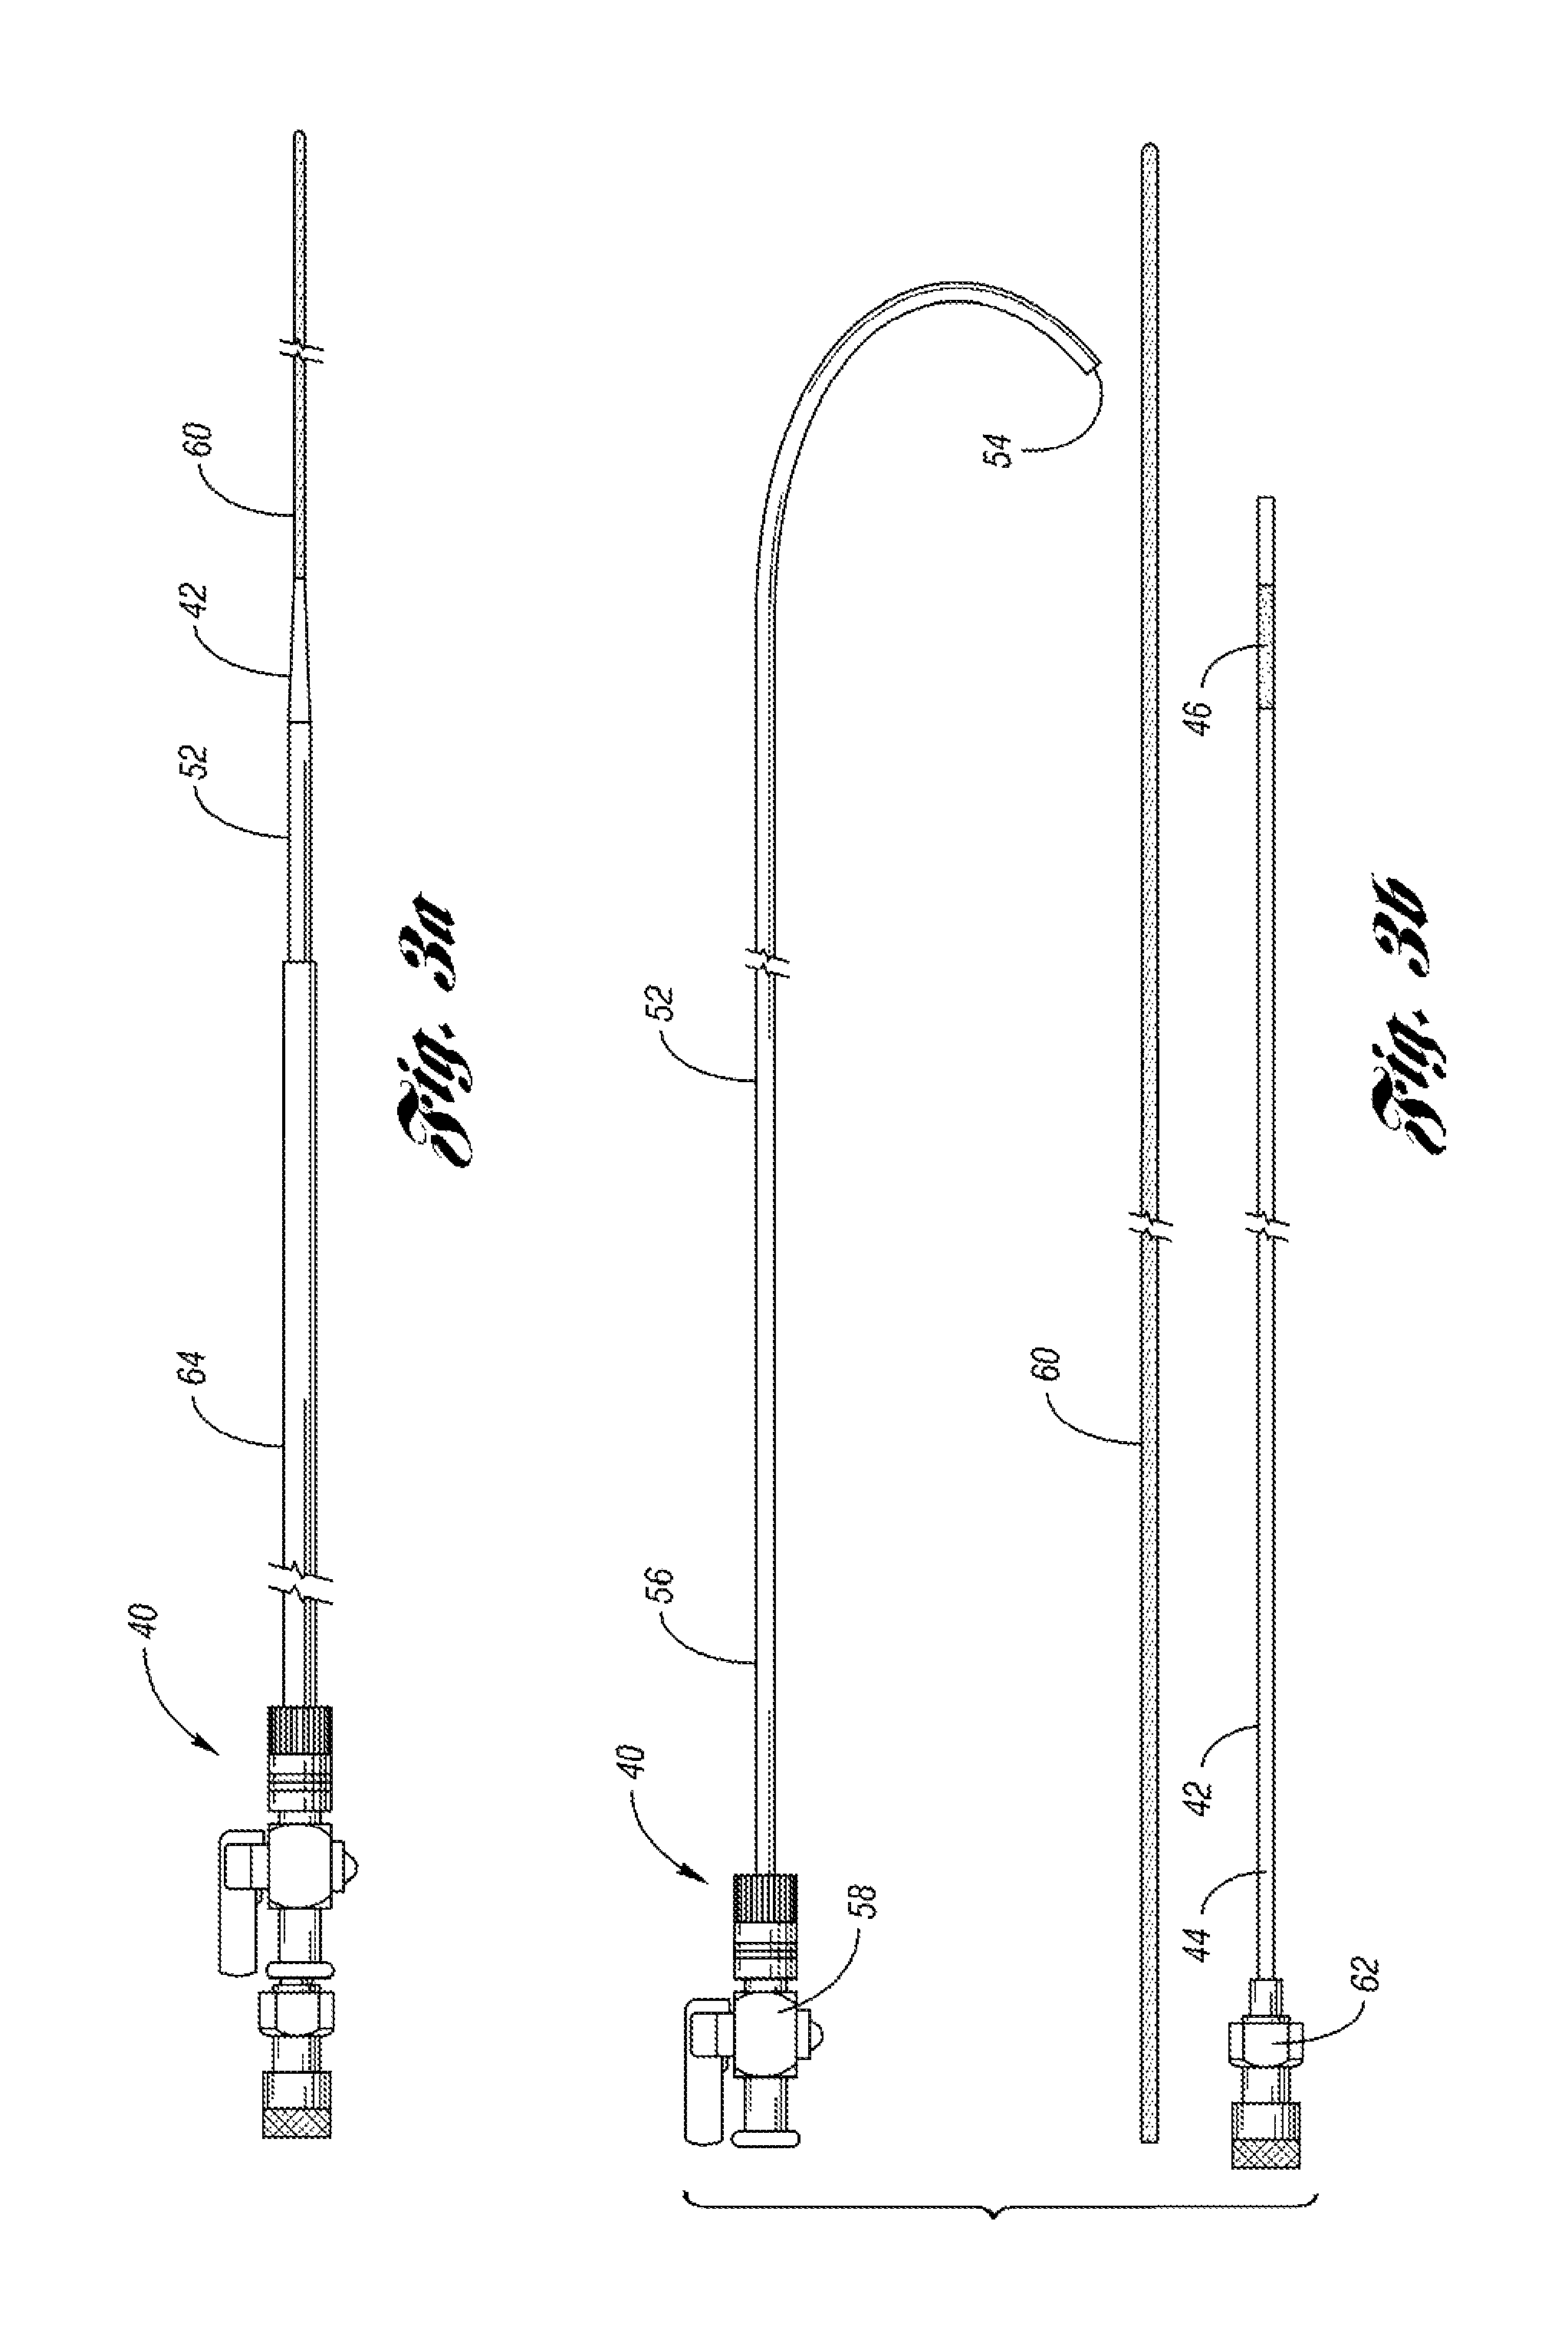 Expandable device for treatment of a stricture in a body vessel